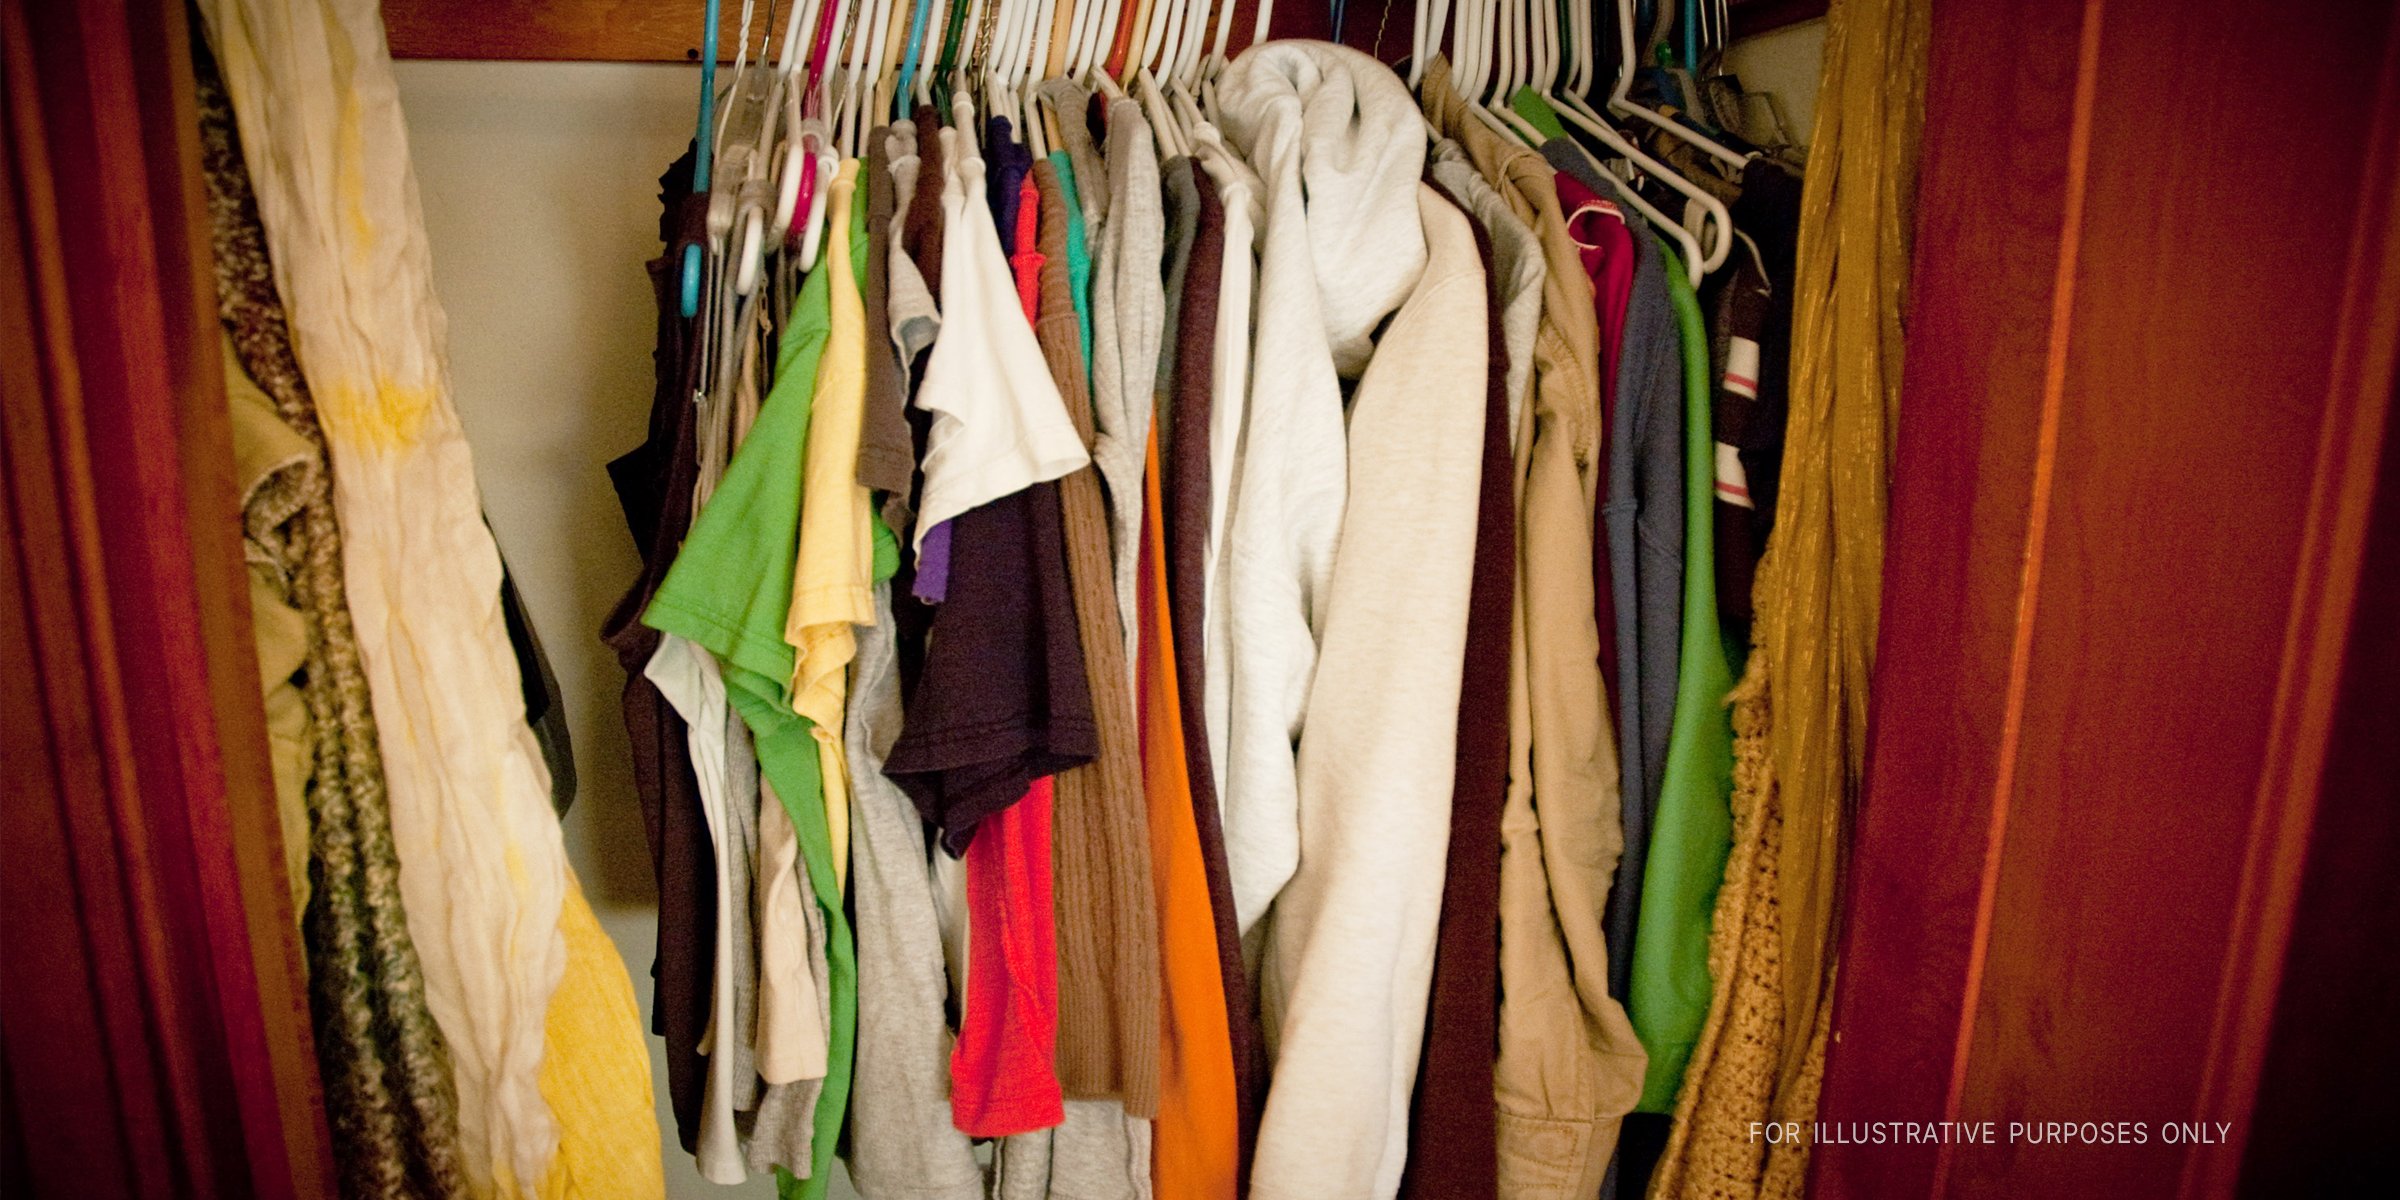 Clothes hanging inside a closet | Source: Flickr / Jodimichelle (CC BY-SA 2.0) 